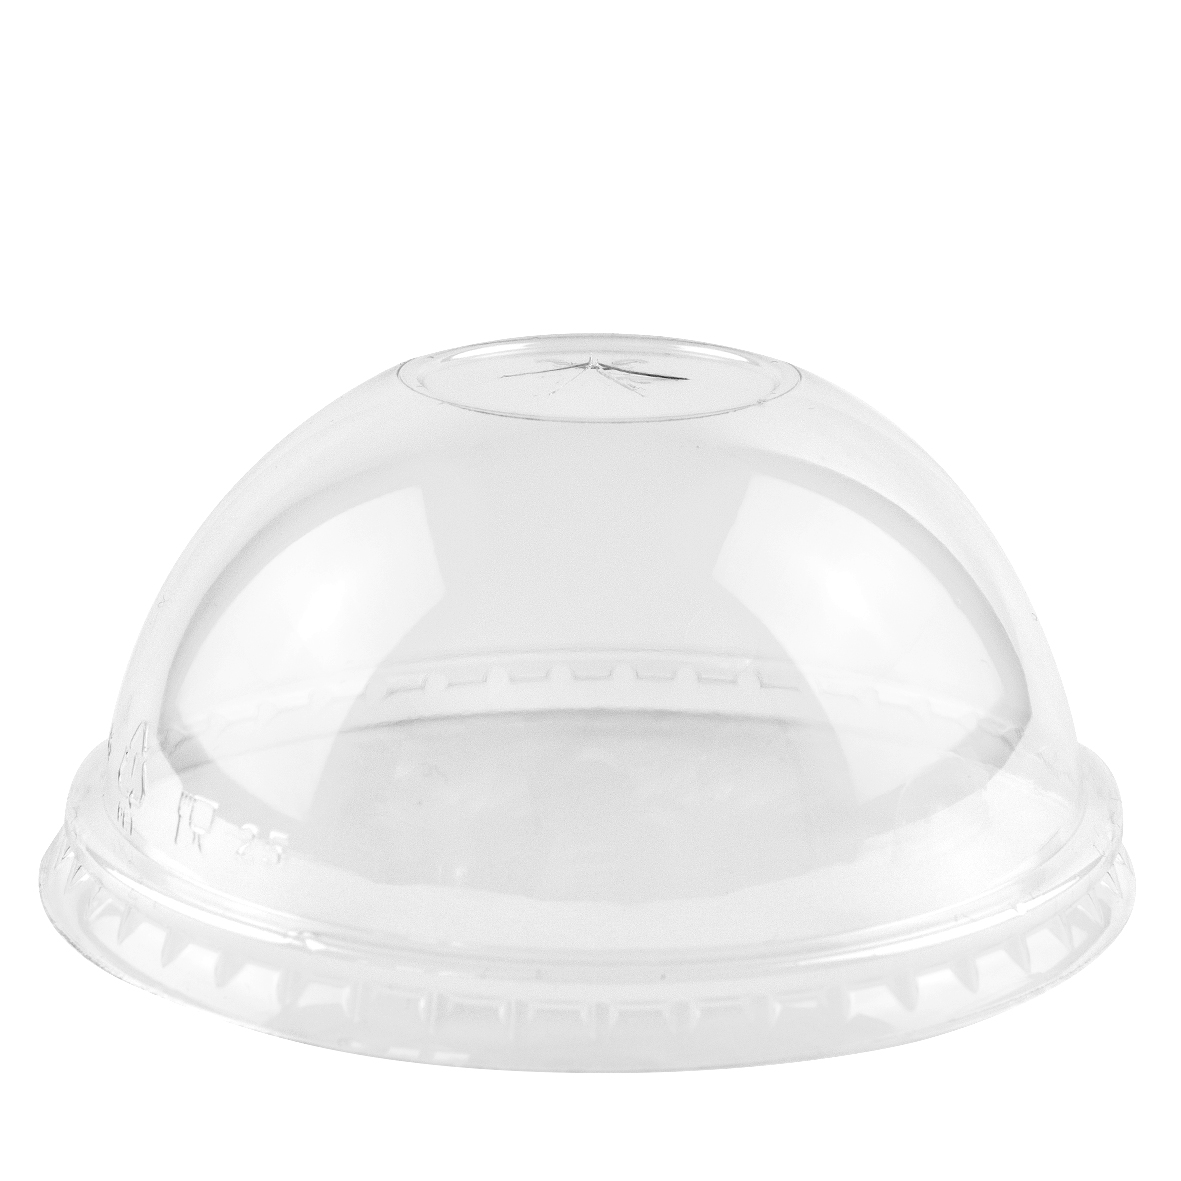 Dome Lid Crossed f. Clear Cup, 9-20 oz.